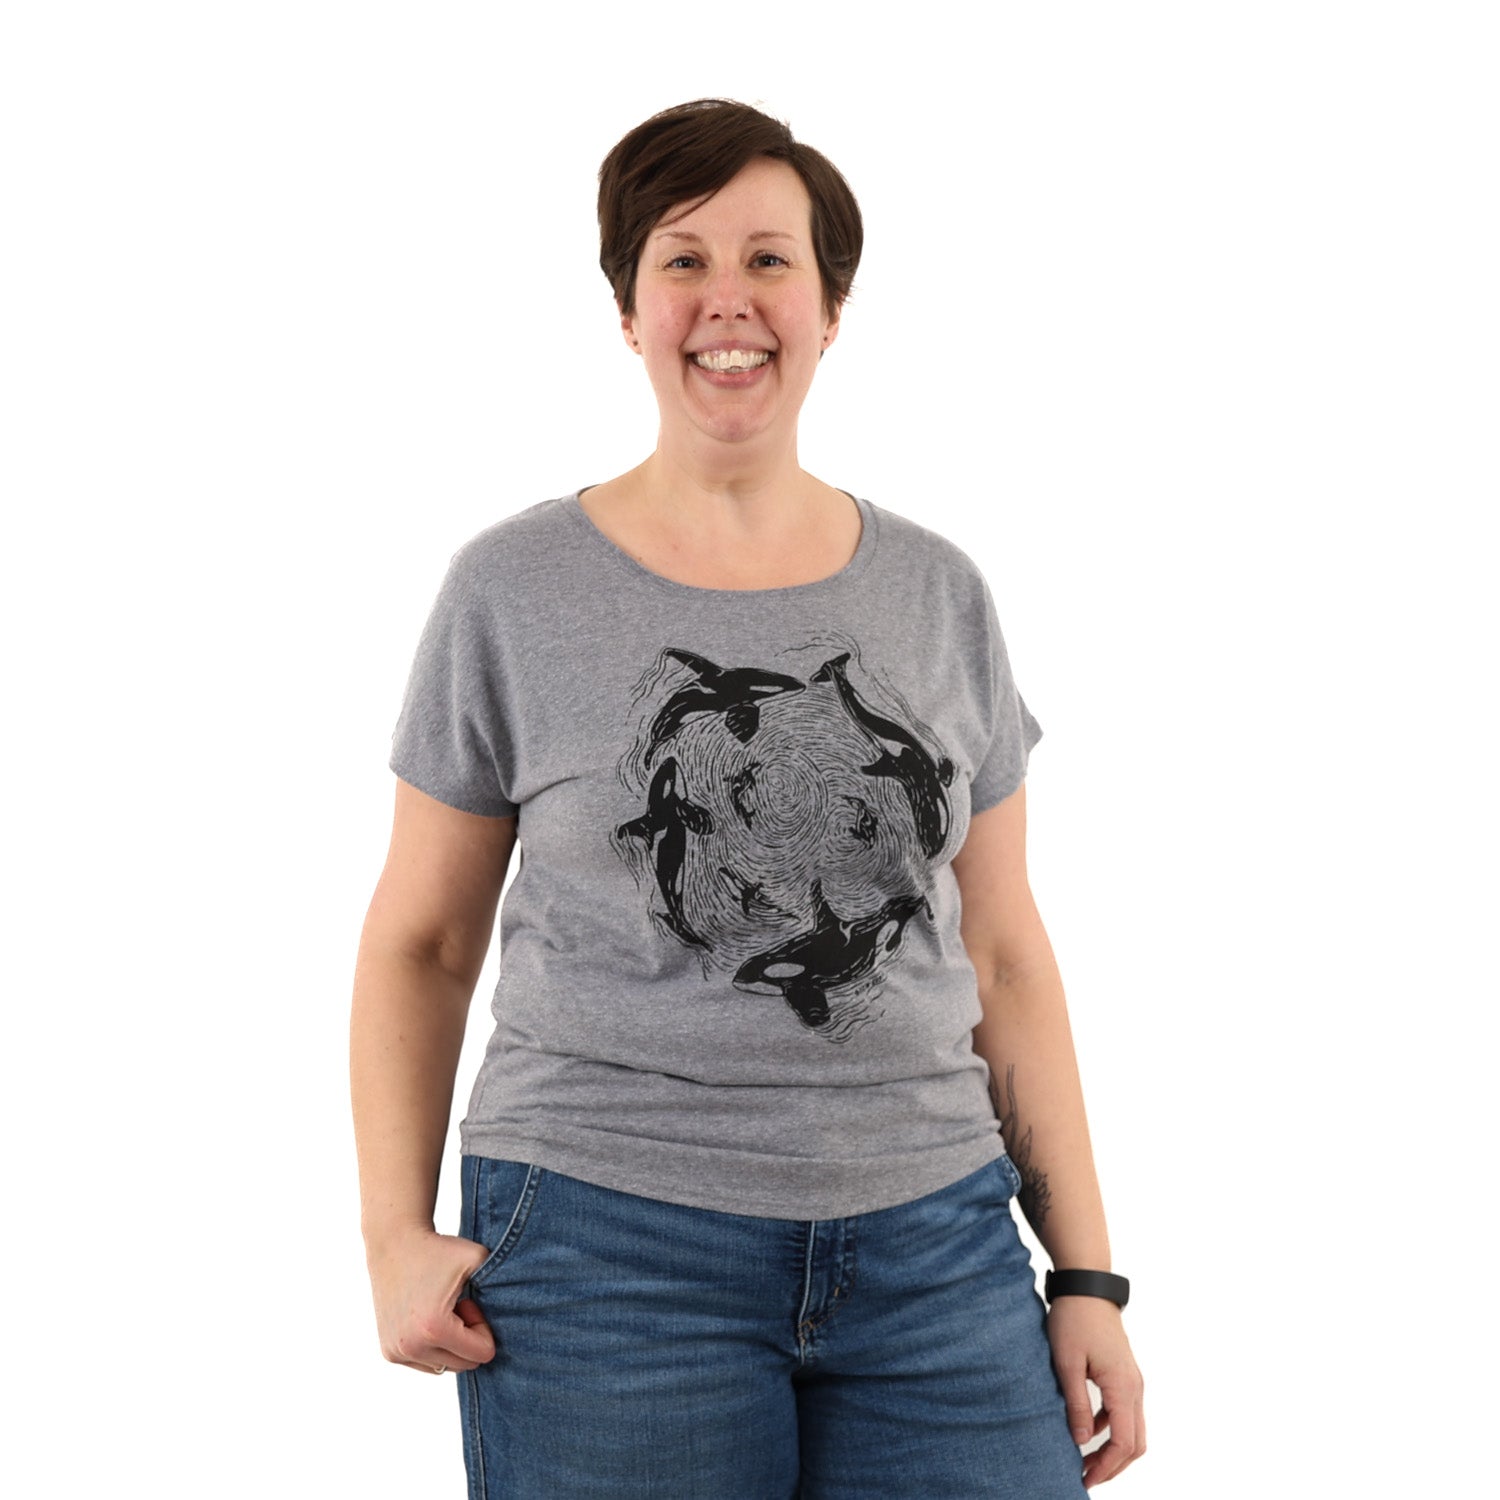  Woman wearing relax fit grey t shirt with orca whales printed in black ink